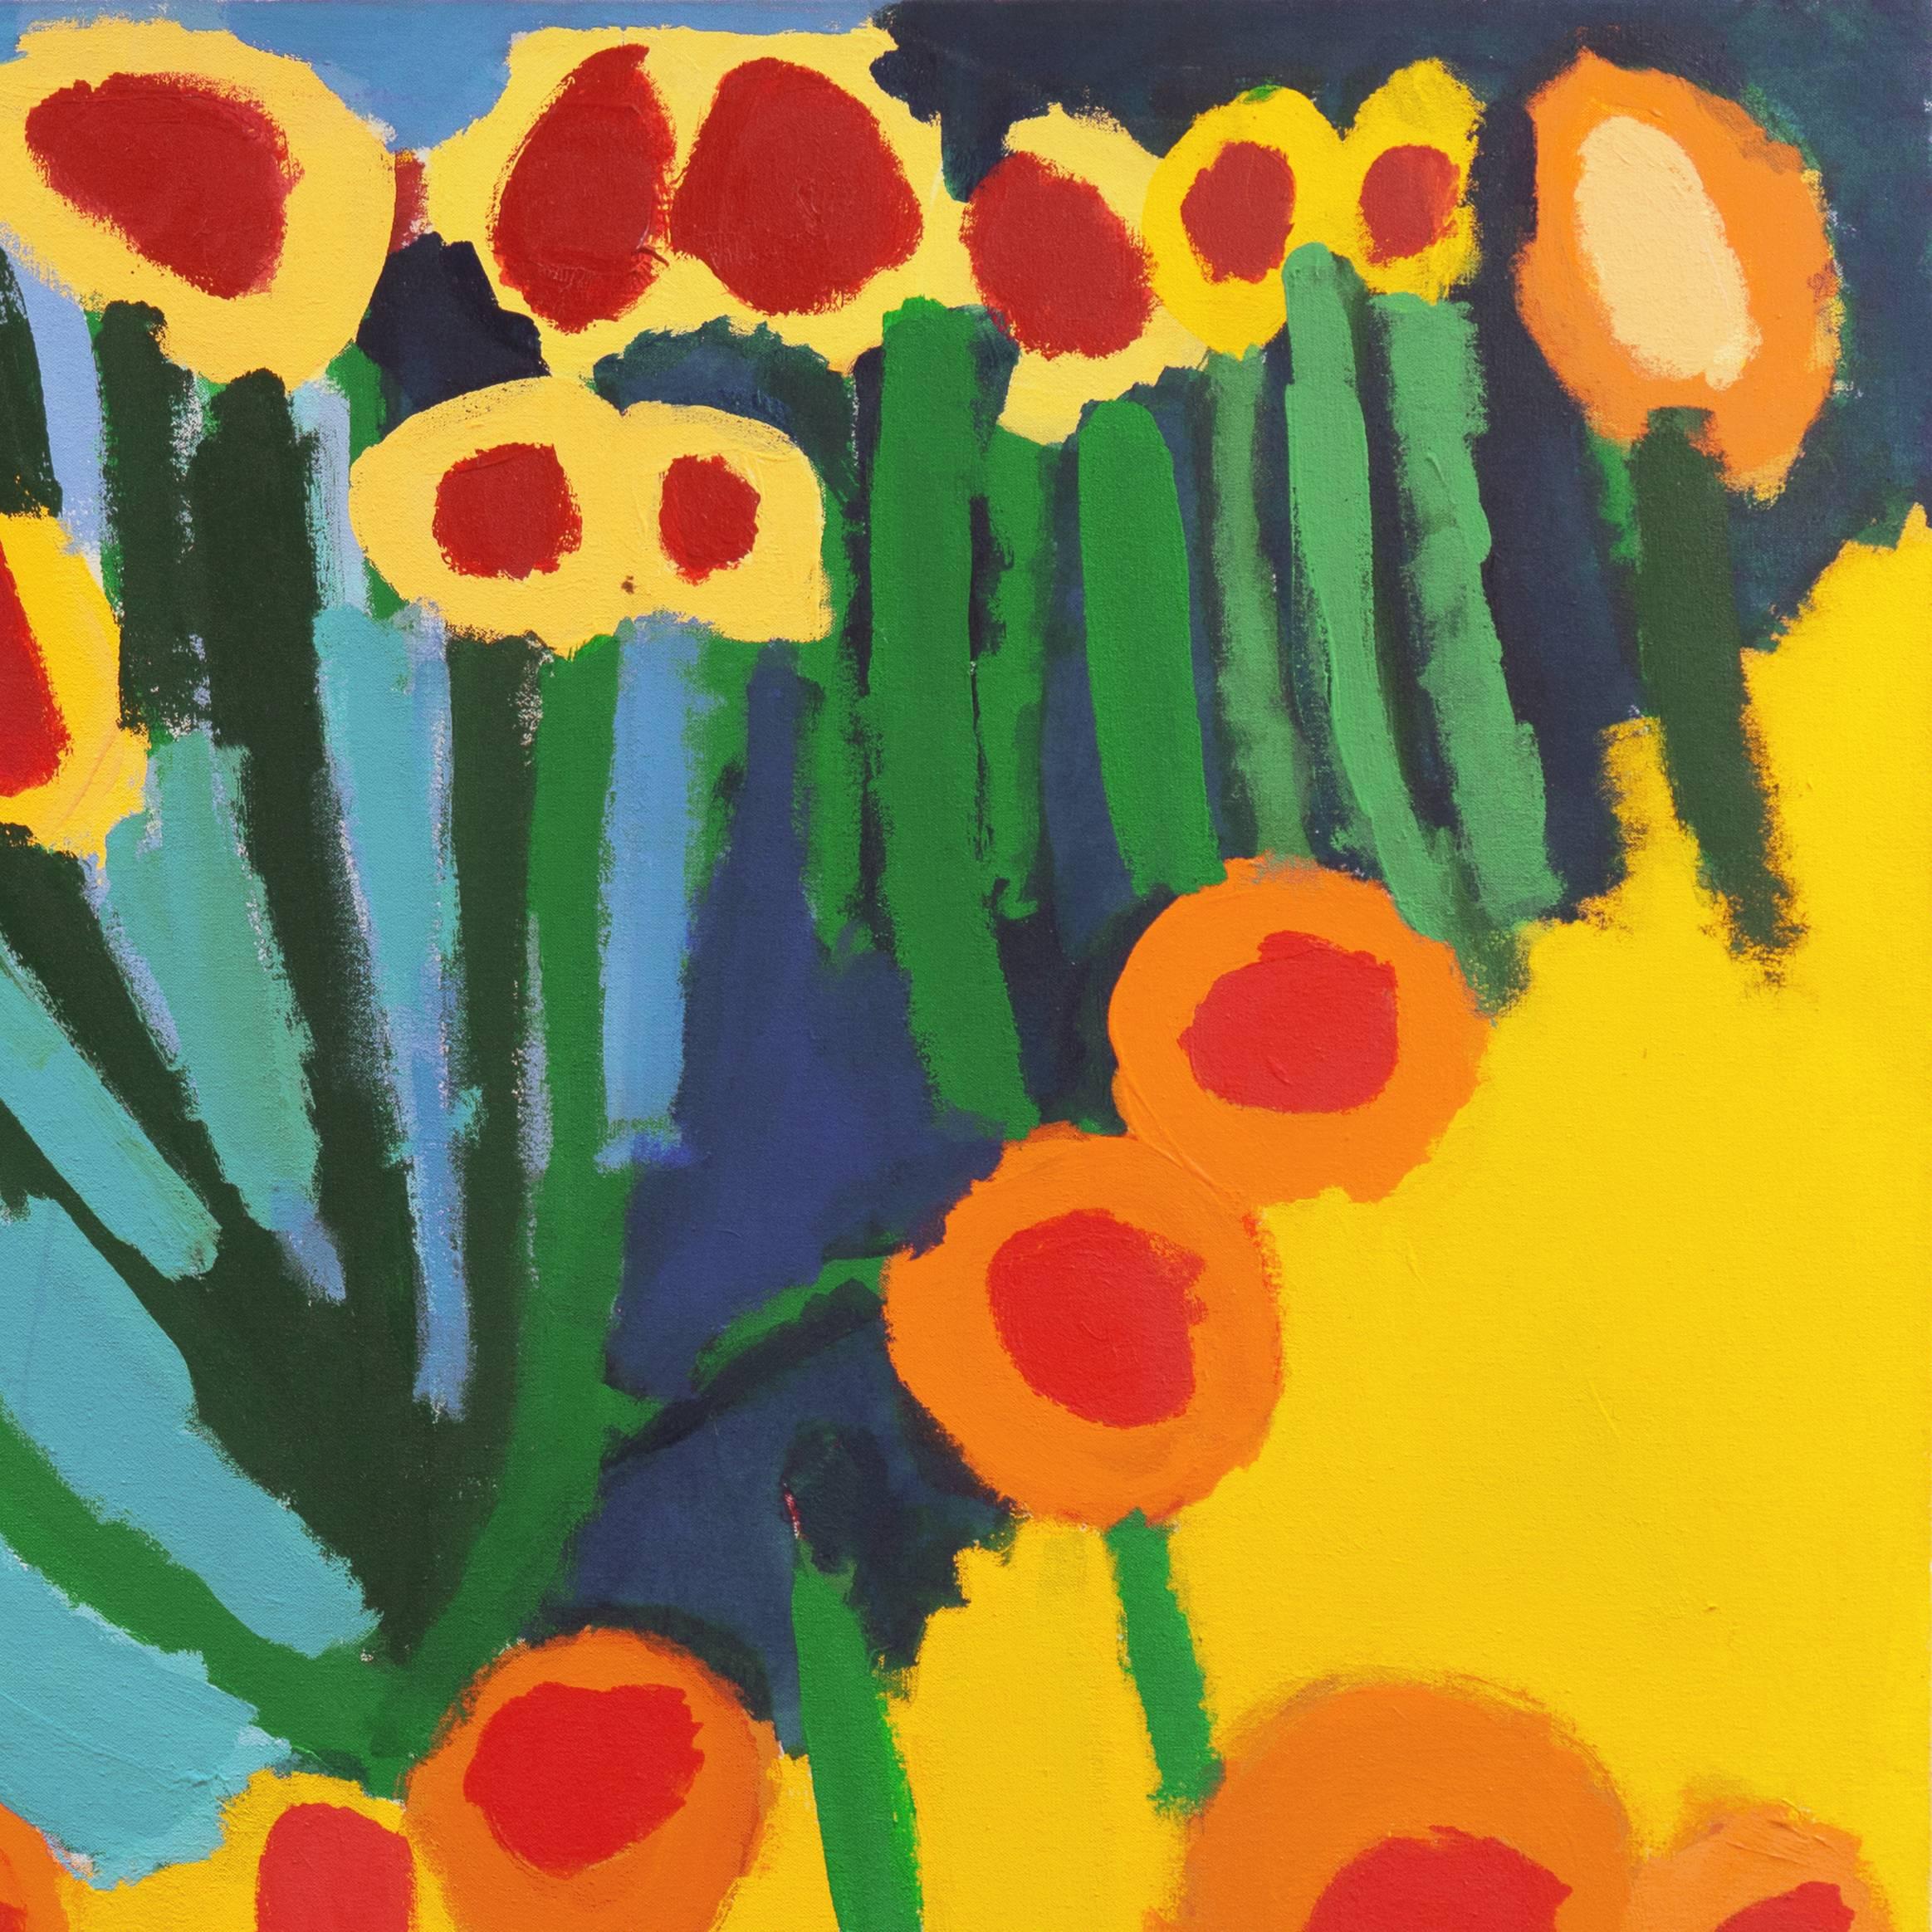 A vibrant semi-abstracted study of flowers. 

Signed lower right, 'Nelson Tygart'; additionally signed and dated 1991 verso on lower stretcher bar. 

A San Francisco bay area artist, Nelson Tygart was one of the first members of the Creative Growth